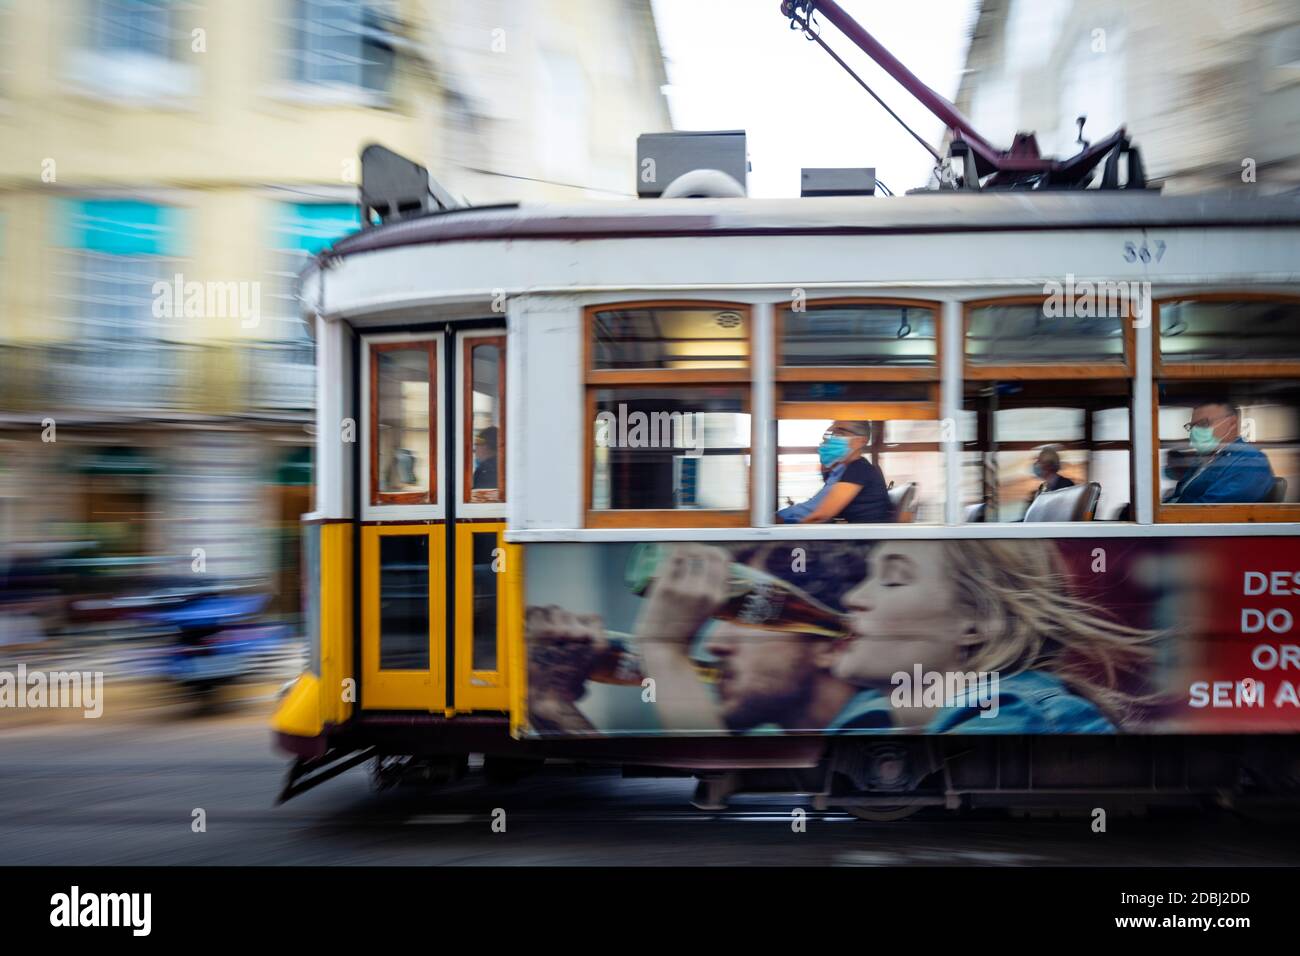 A traditional historic Remodelado electric tram moving through the centre of the city, Lisbon, Portugal, Europe Stock Photo